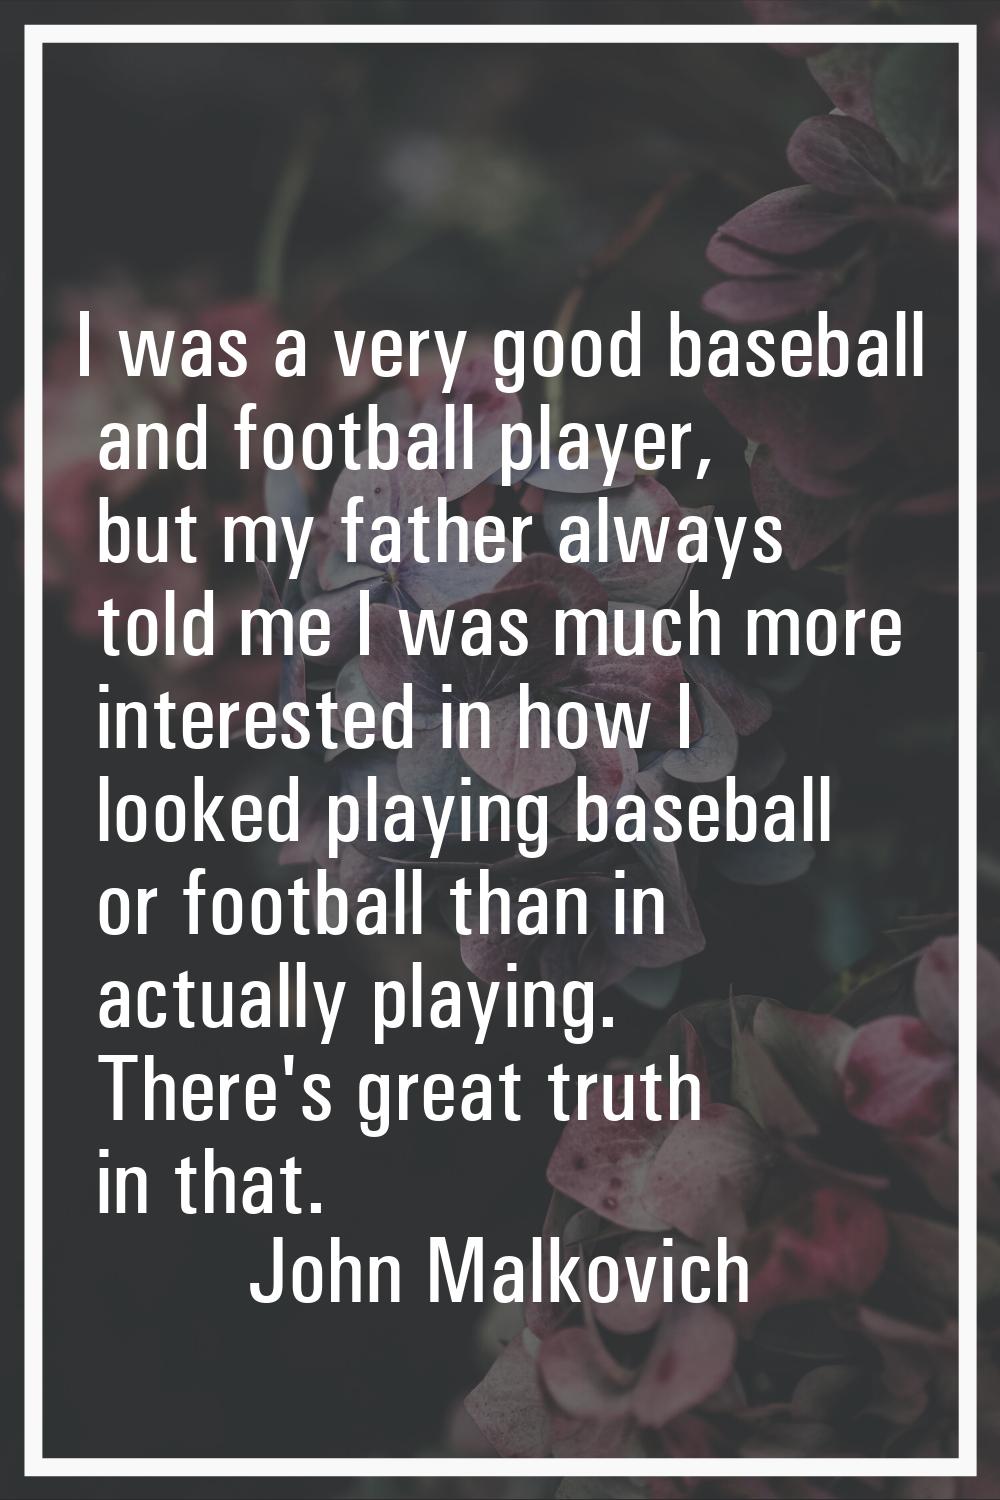 I was a very good baseball and football player, but my father always told me I was much more intere